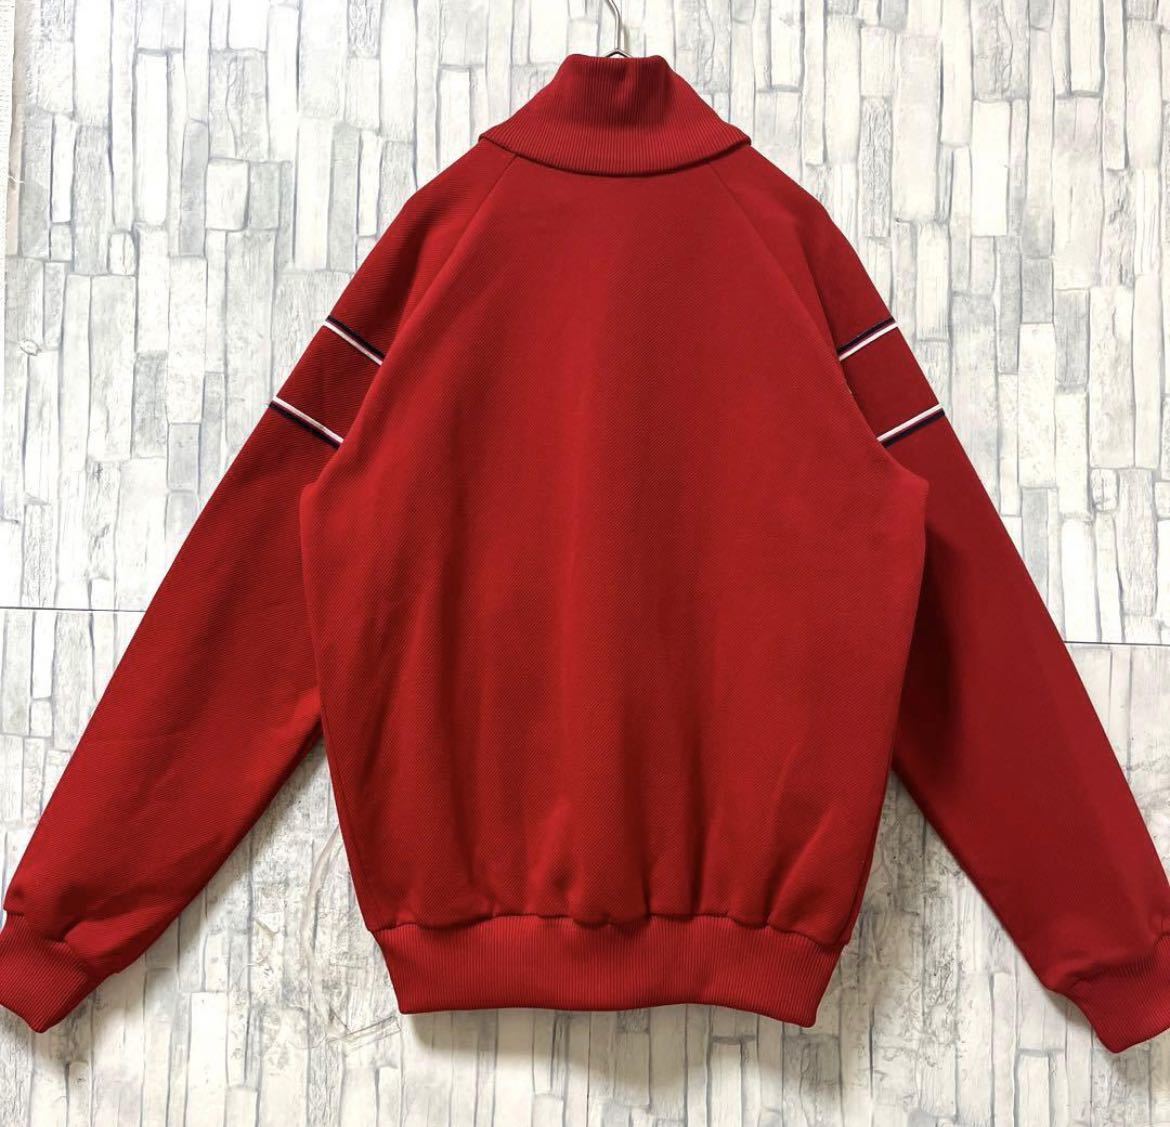 adidas Old Adidas jersey on jersey 70s-80s 70 period 80 period Descente size S red to ref . il long sleeve beautiful goods 